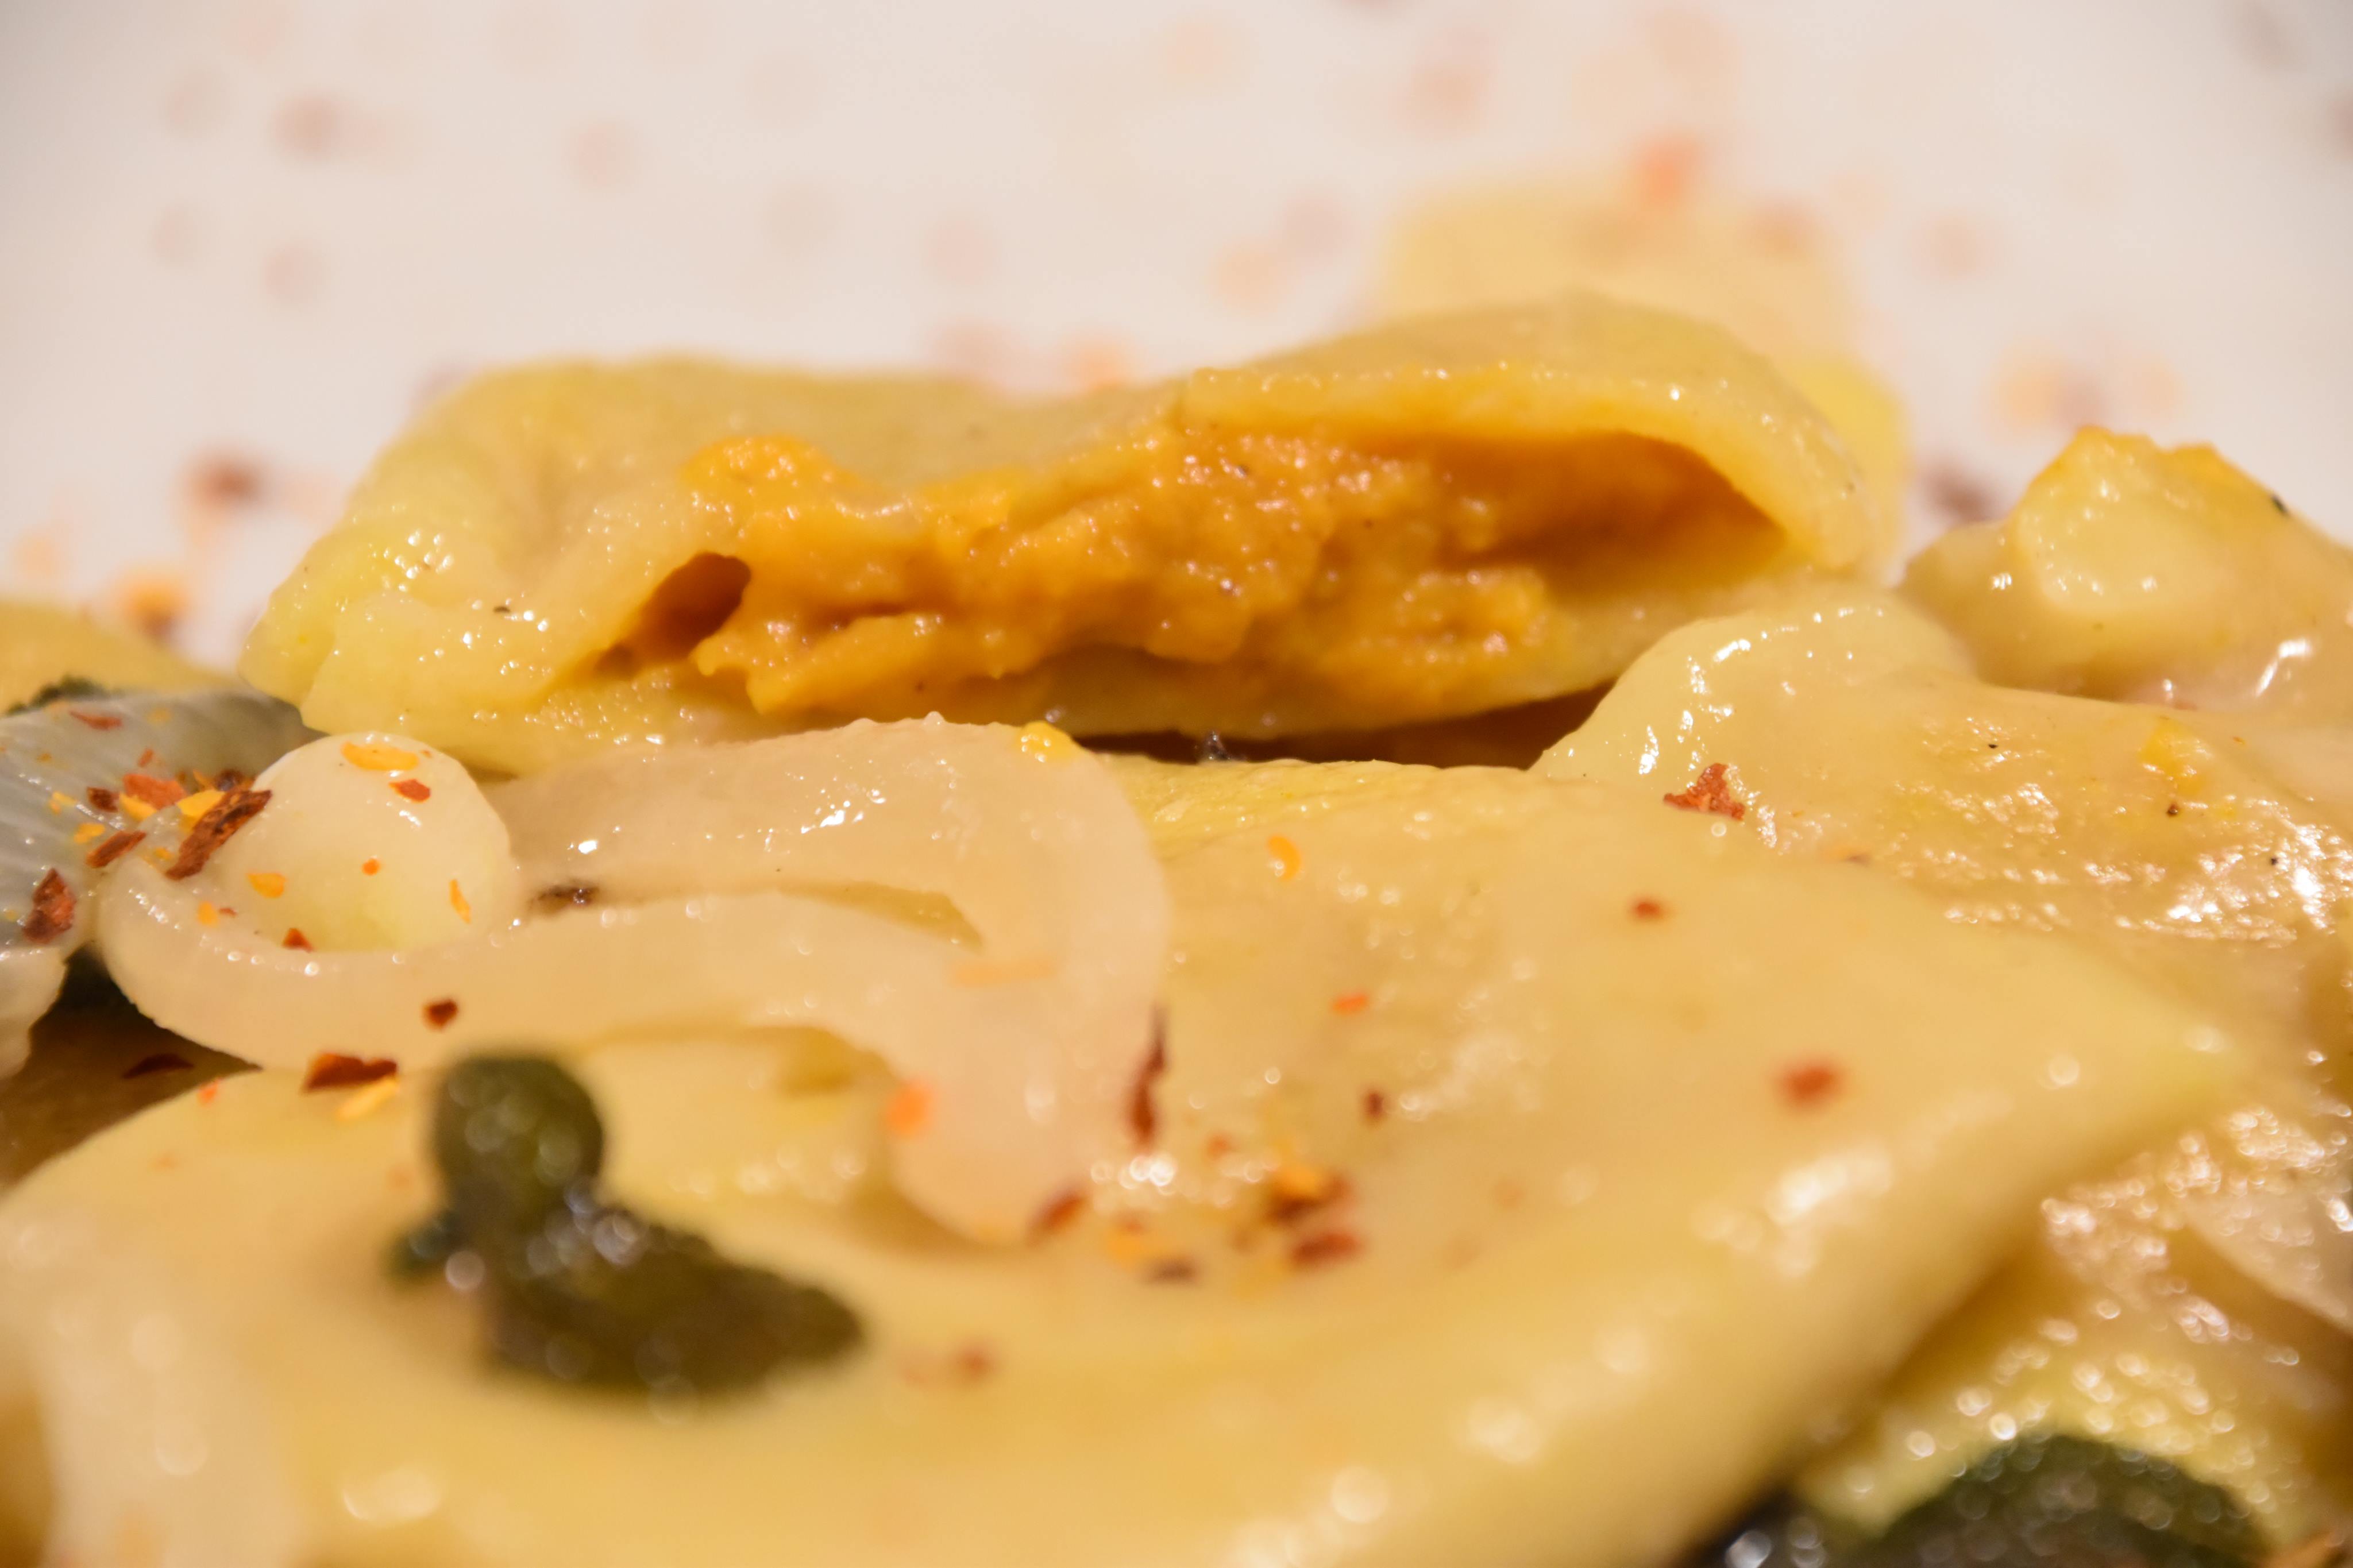 ravioli filled with butternut squash  ready